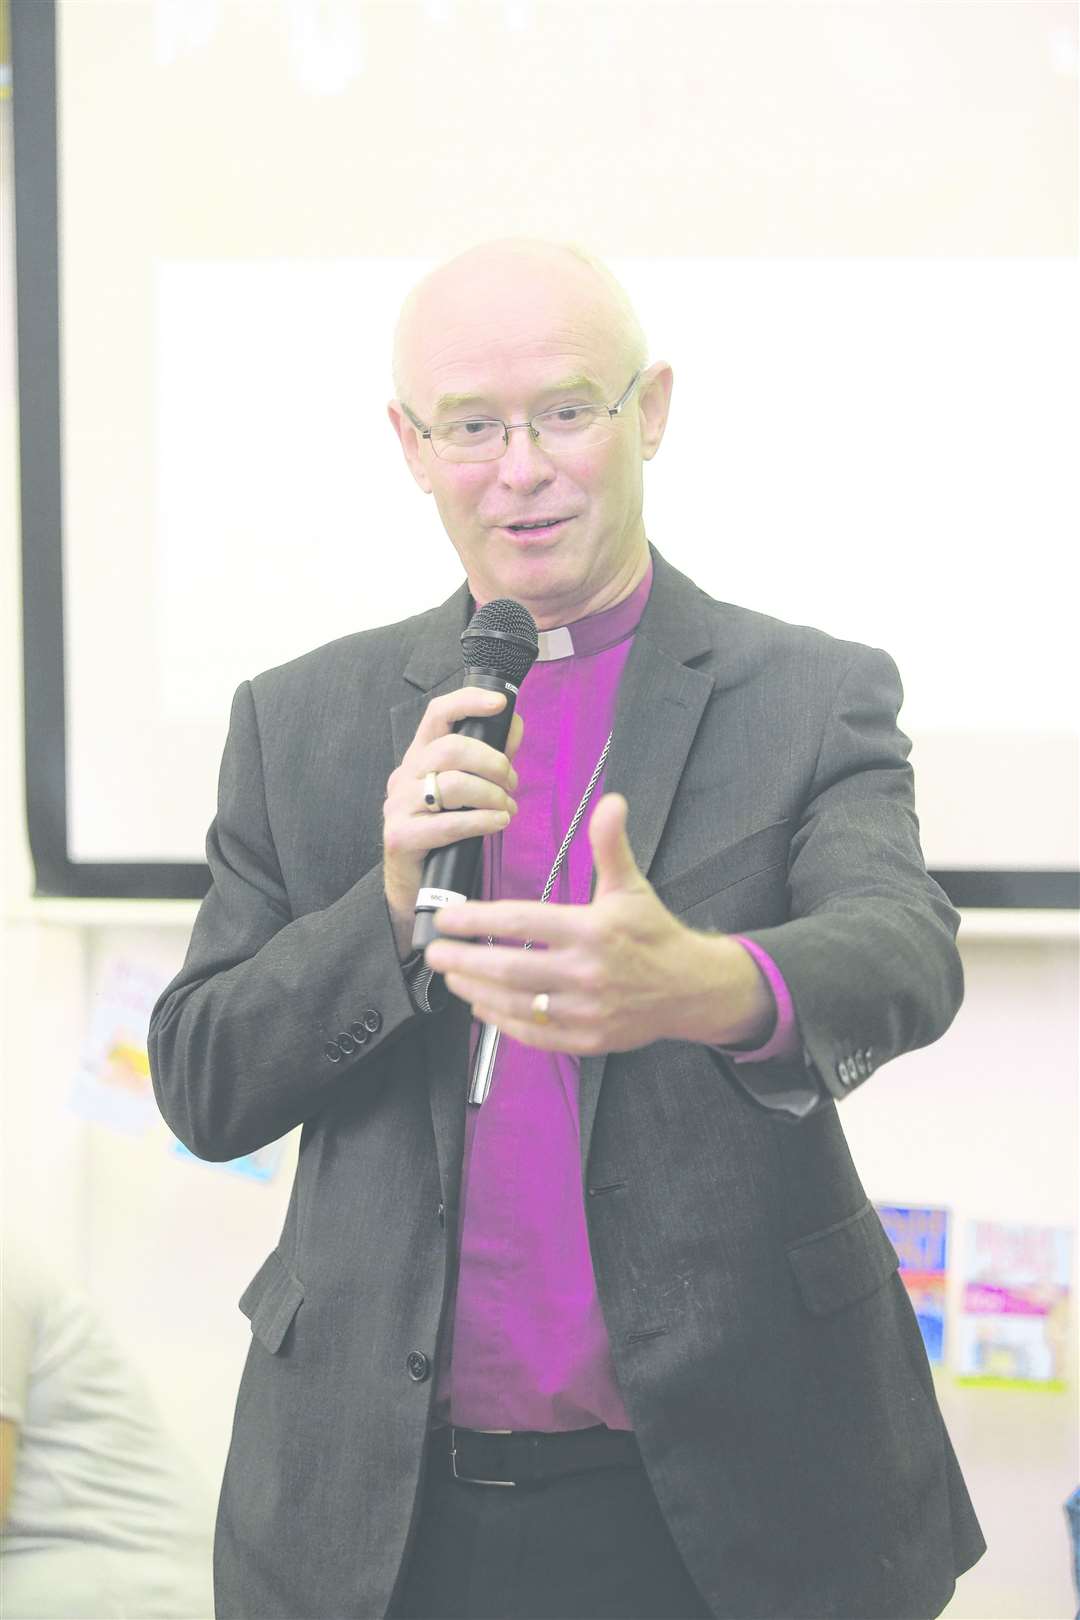 The Bishop of Rochester, Rev James Langstaff has asked any abuse victims or survivors to come forward, if they wish